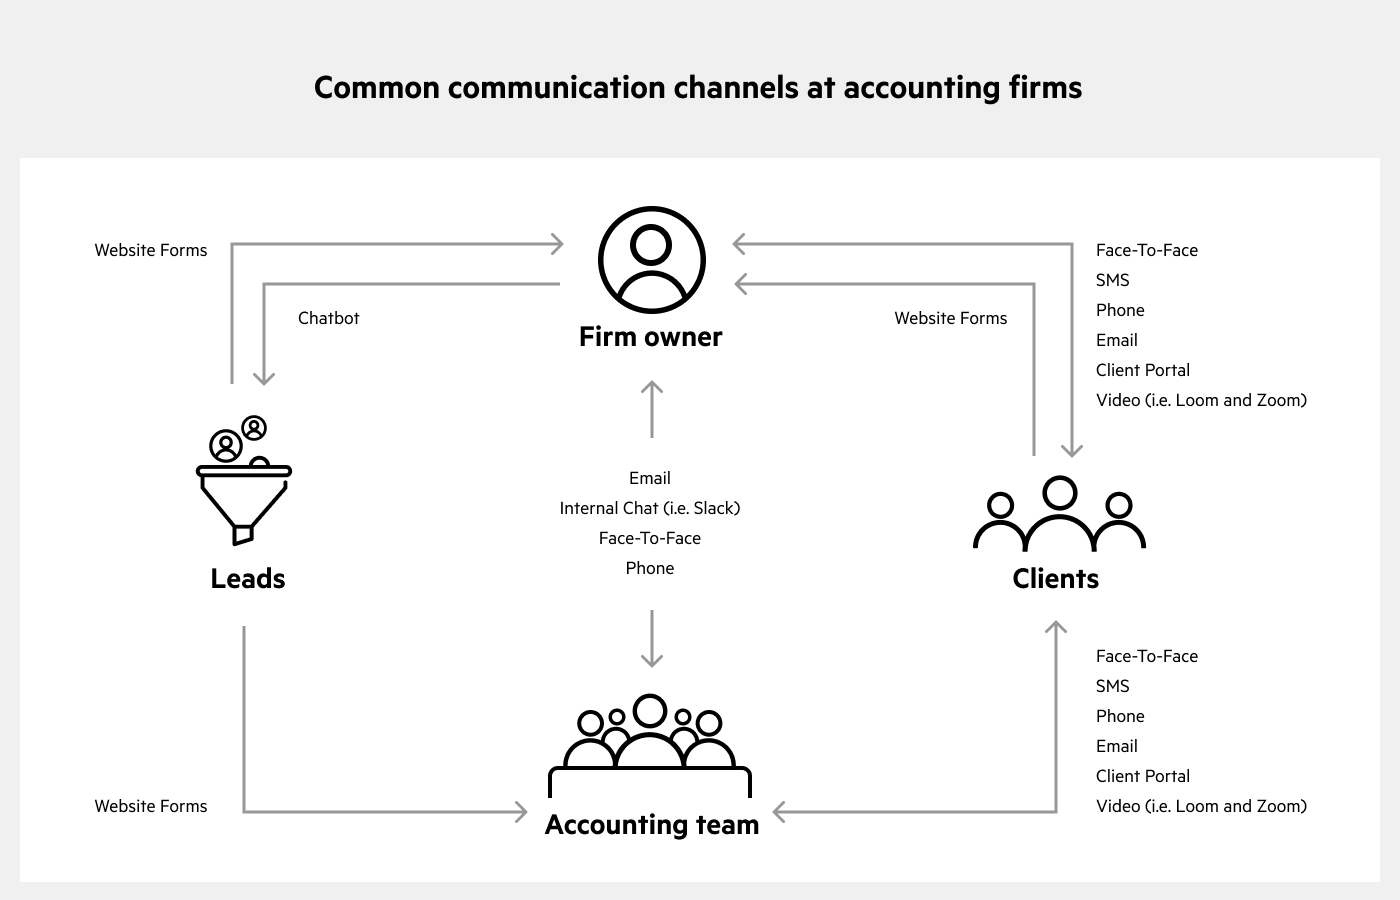 A diagram that shows the common one-way and two-way communication channels and communication flow between the accounting firm owner, accounting team, clients, and leads. It includes communication types that are typical in accounting firms, like face-to-face, SMS, phone calls, email, etc.